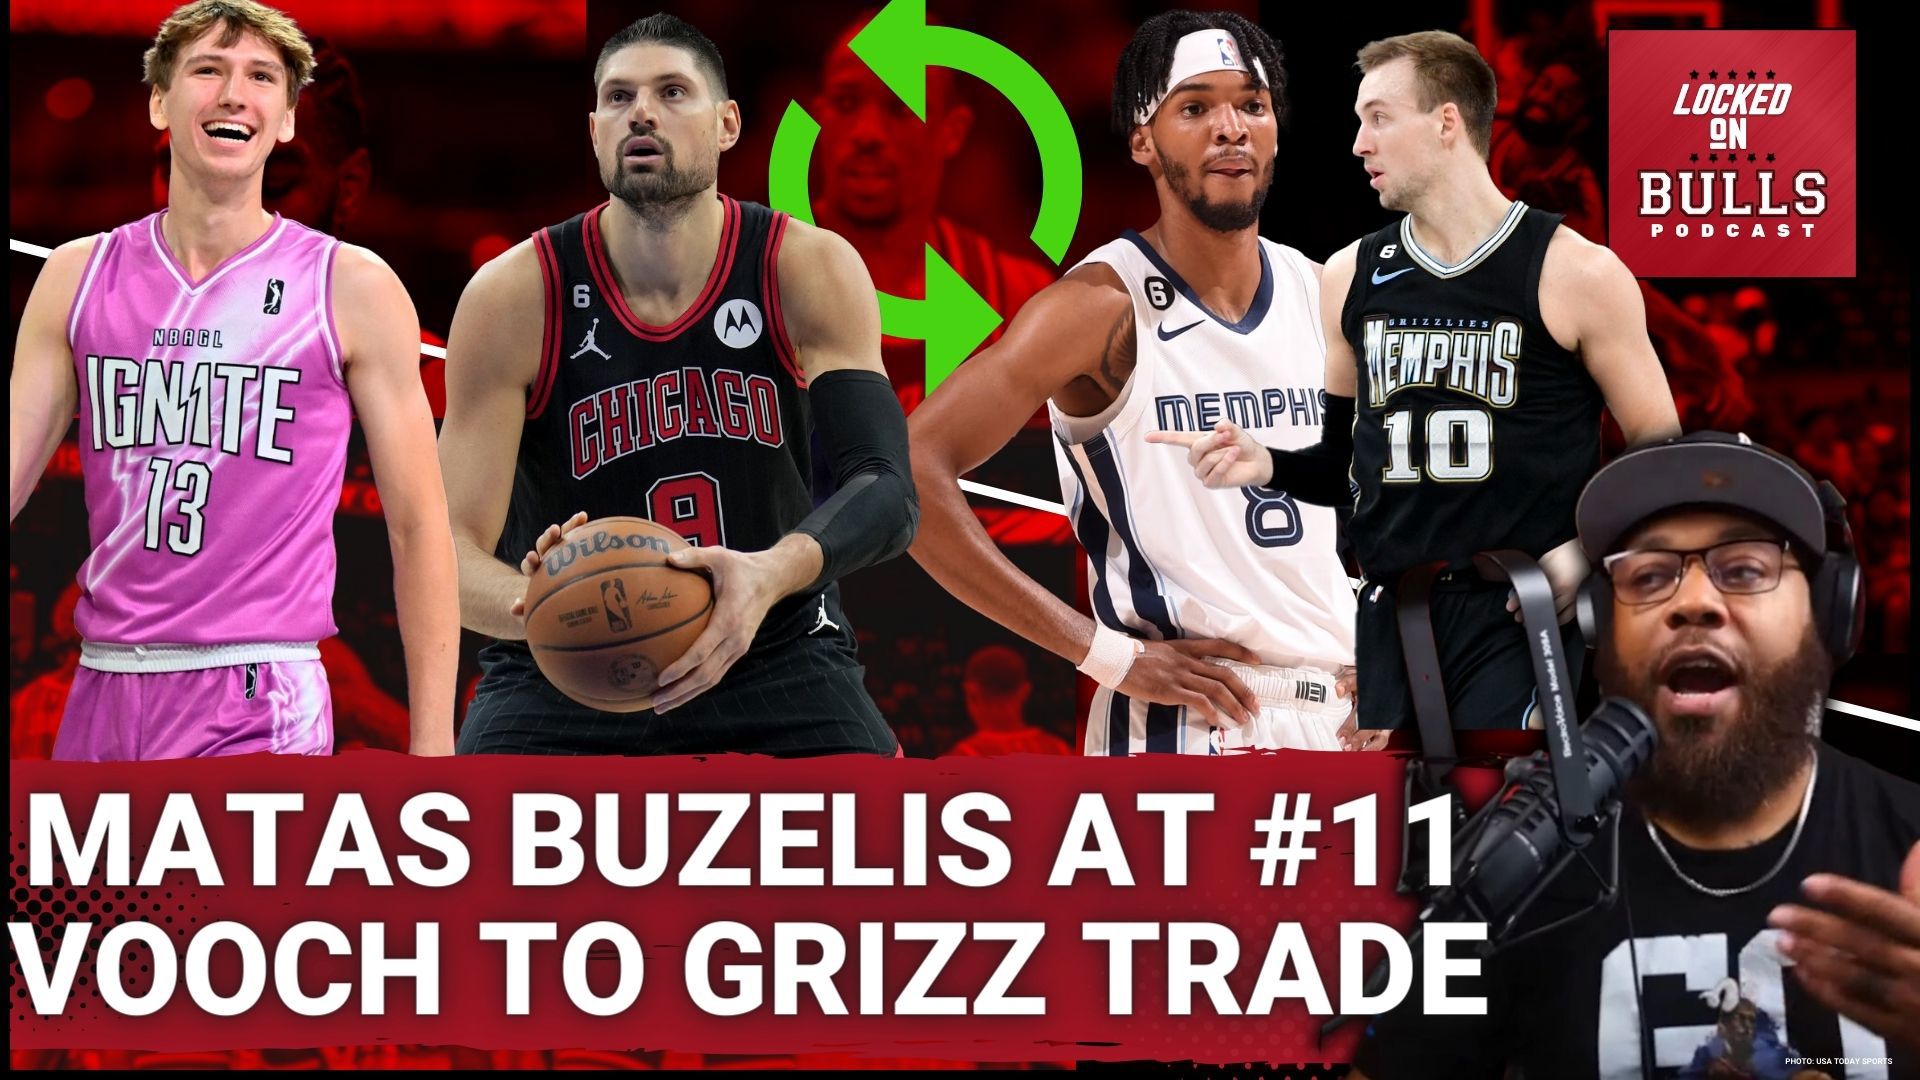 Haize talks about Matas Buzelis as an option for the Bulls at #11. He then looks at trade ideas that send Nikola Vucevic to the Memphis Grizzlies and one that brings